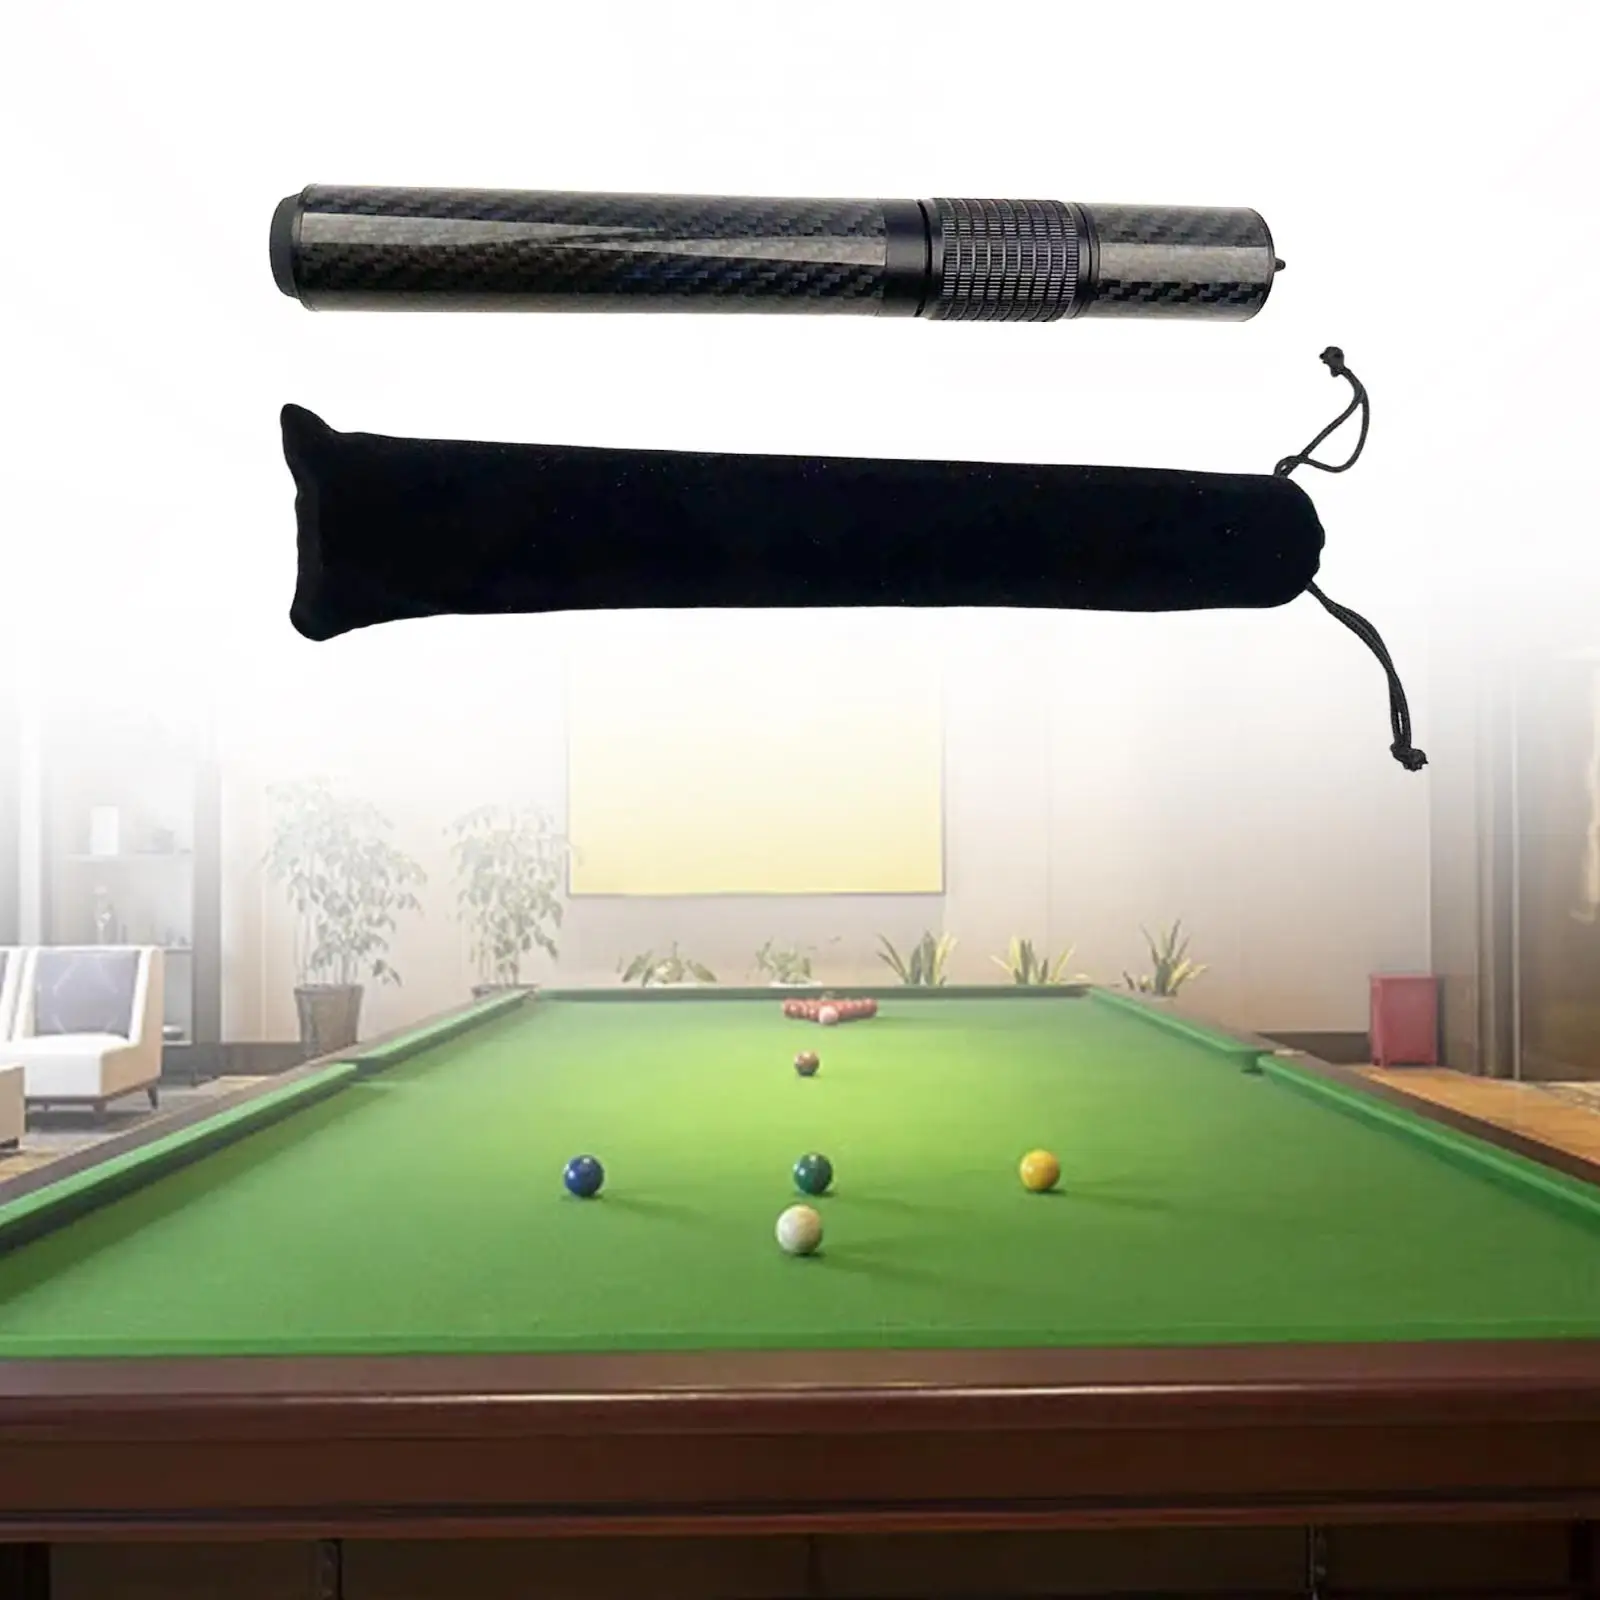 Billiards Pool Cue Extension Lengthen Tools 9.45in~13.39in Billiards Accessories Adjustable for Professional Enthusiast Lovers